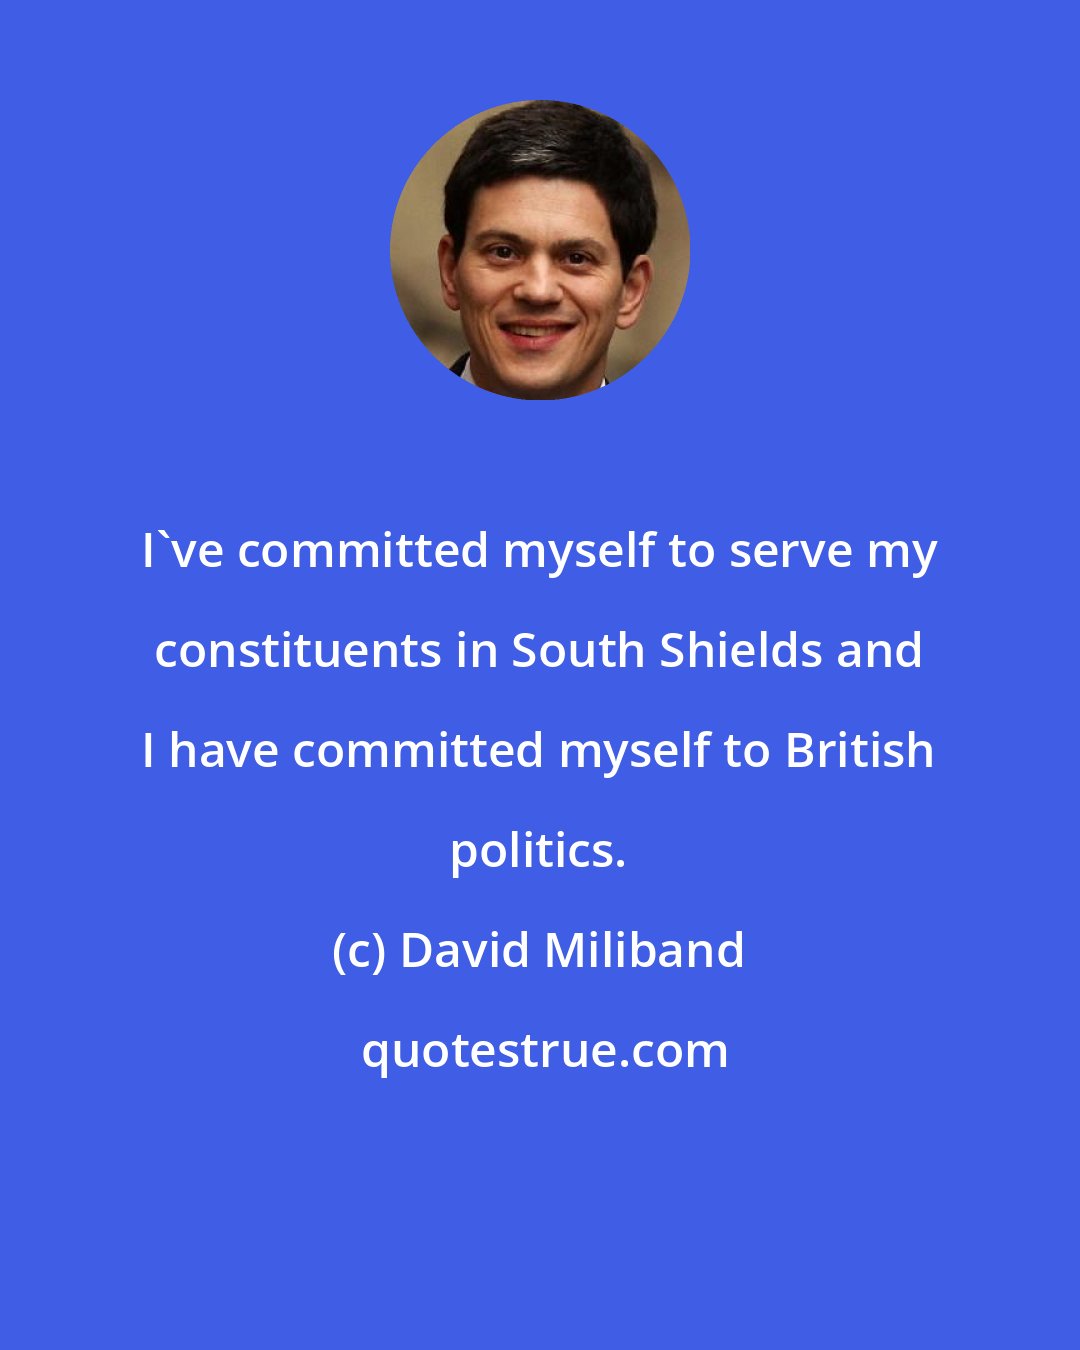 David Miliband: I've committed myself to serve my constituents in South Shields and I have committed myself to British politics.